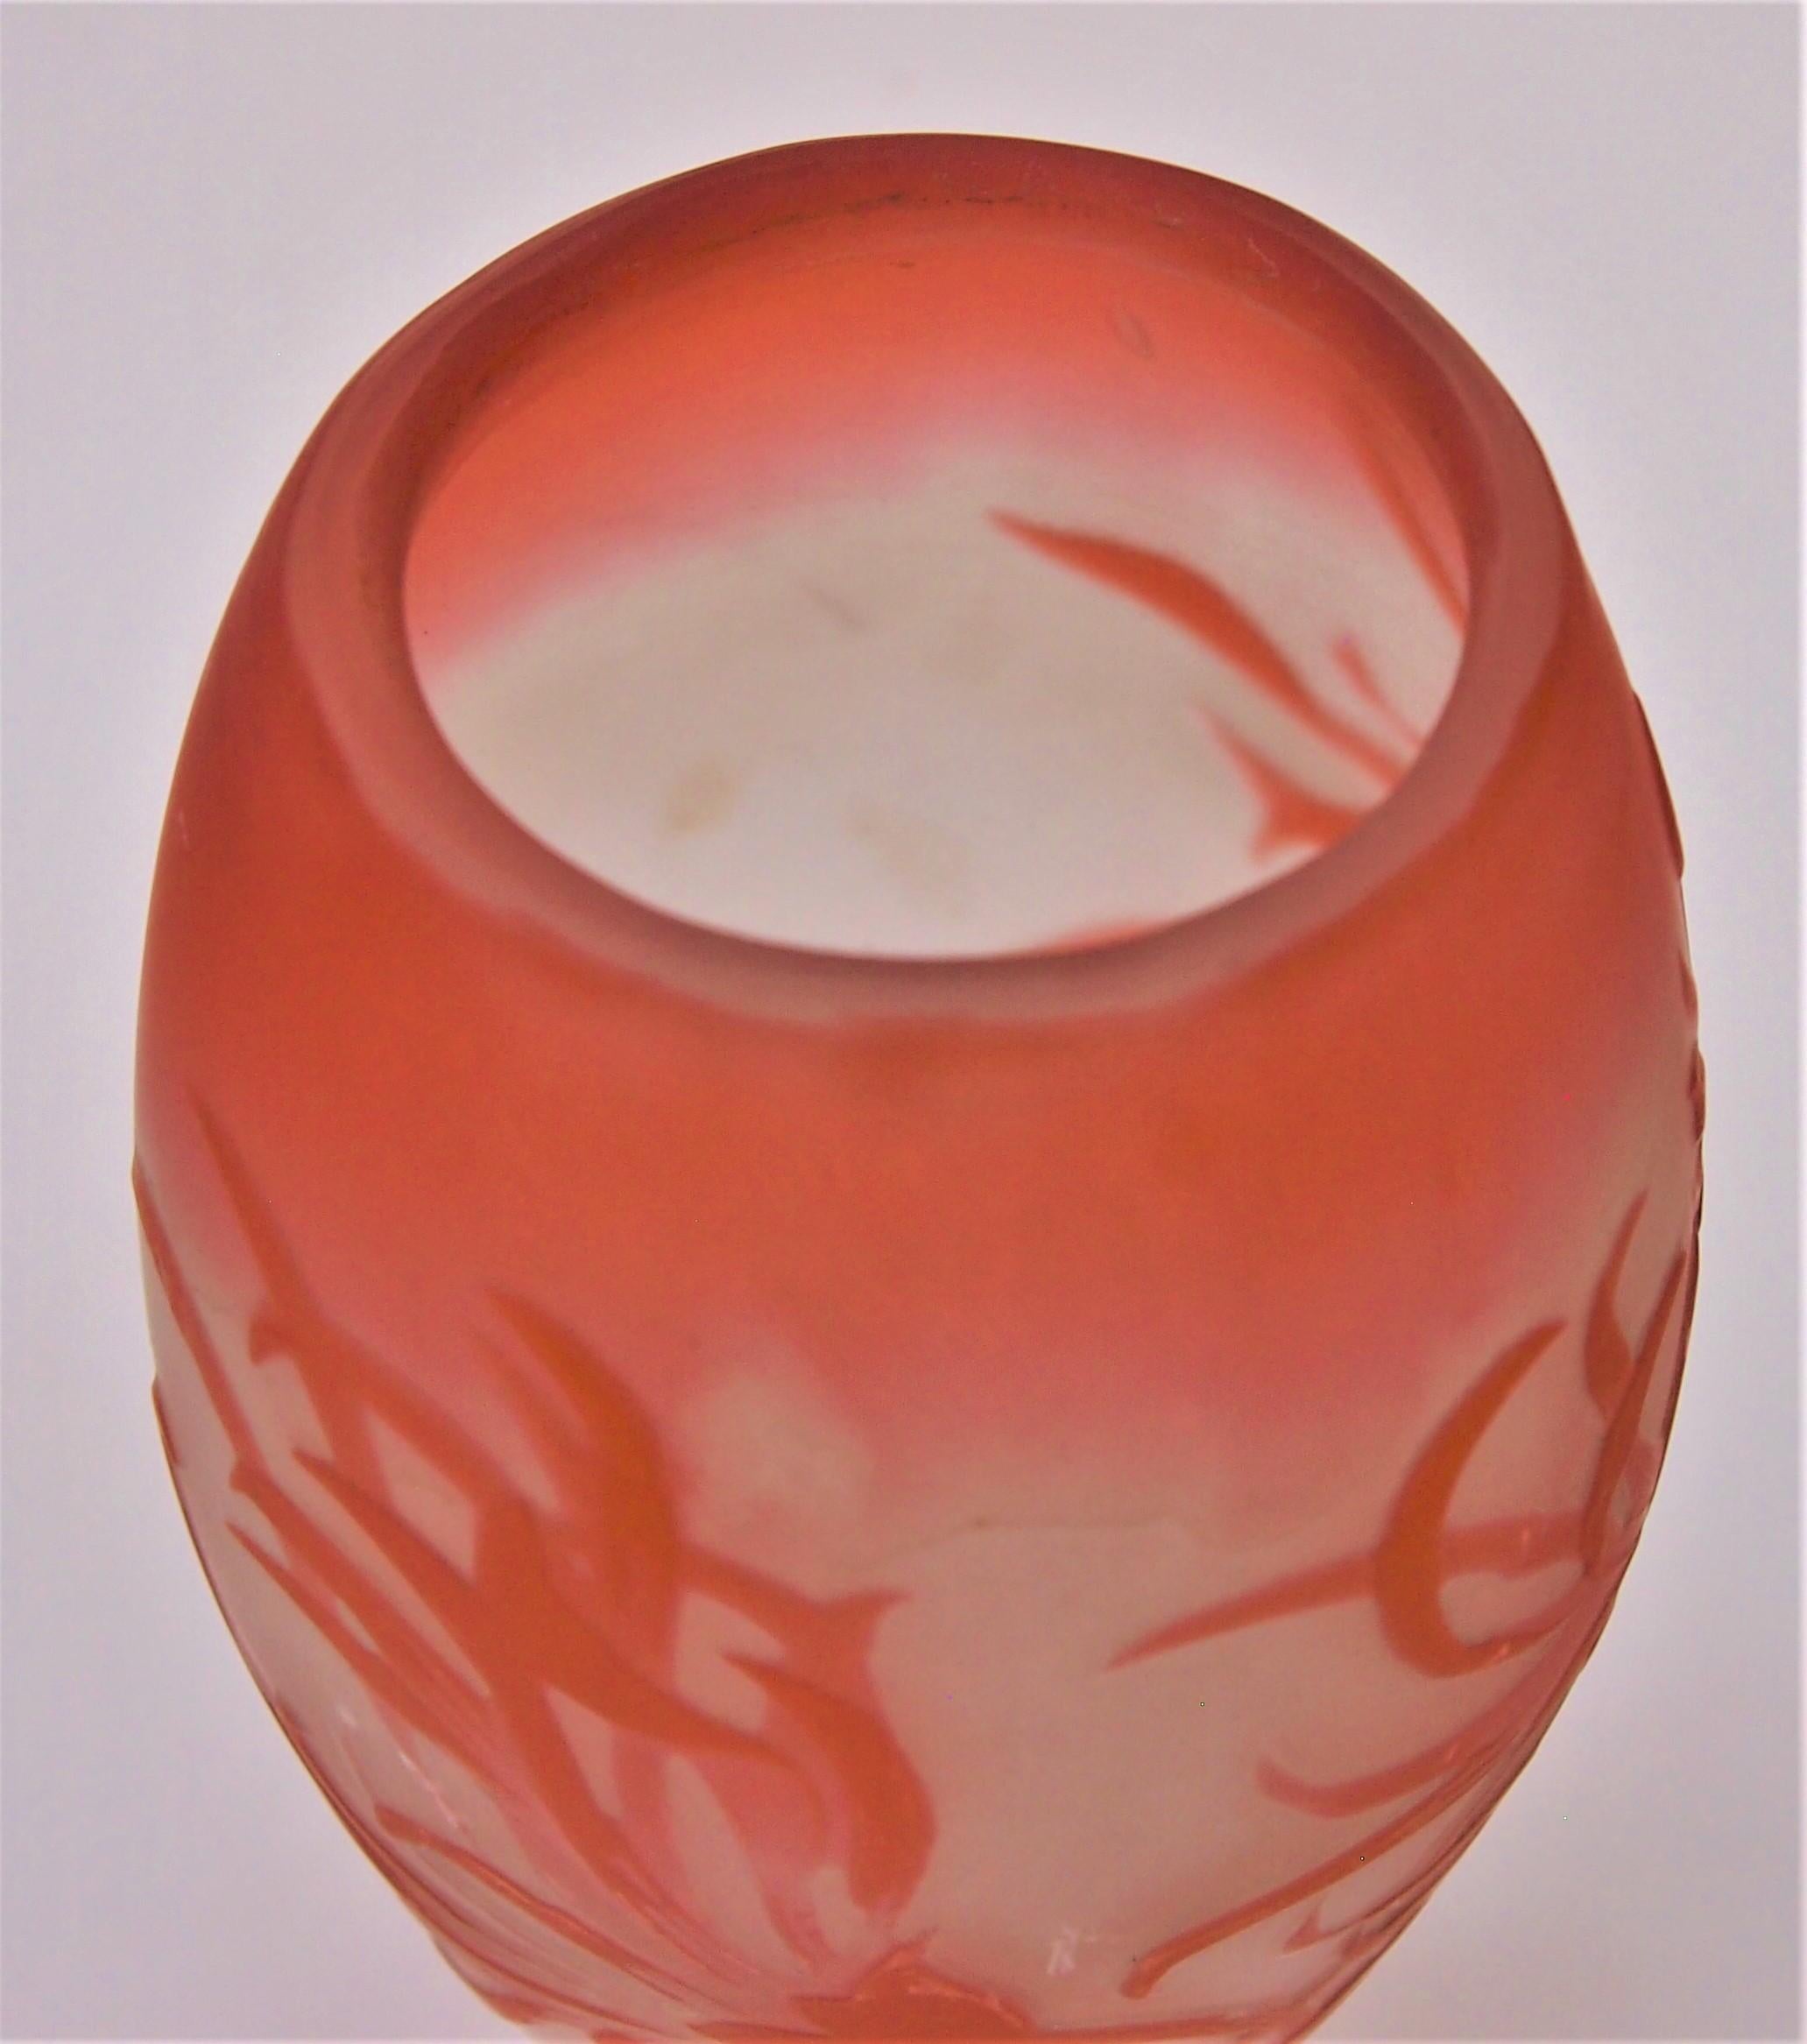 French Art Nouveau Emile Galle Cameo Glass Limited Edition Vase, circa 1900 For Sale 1